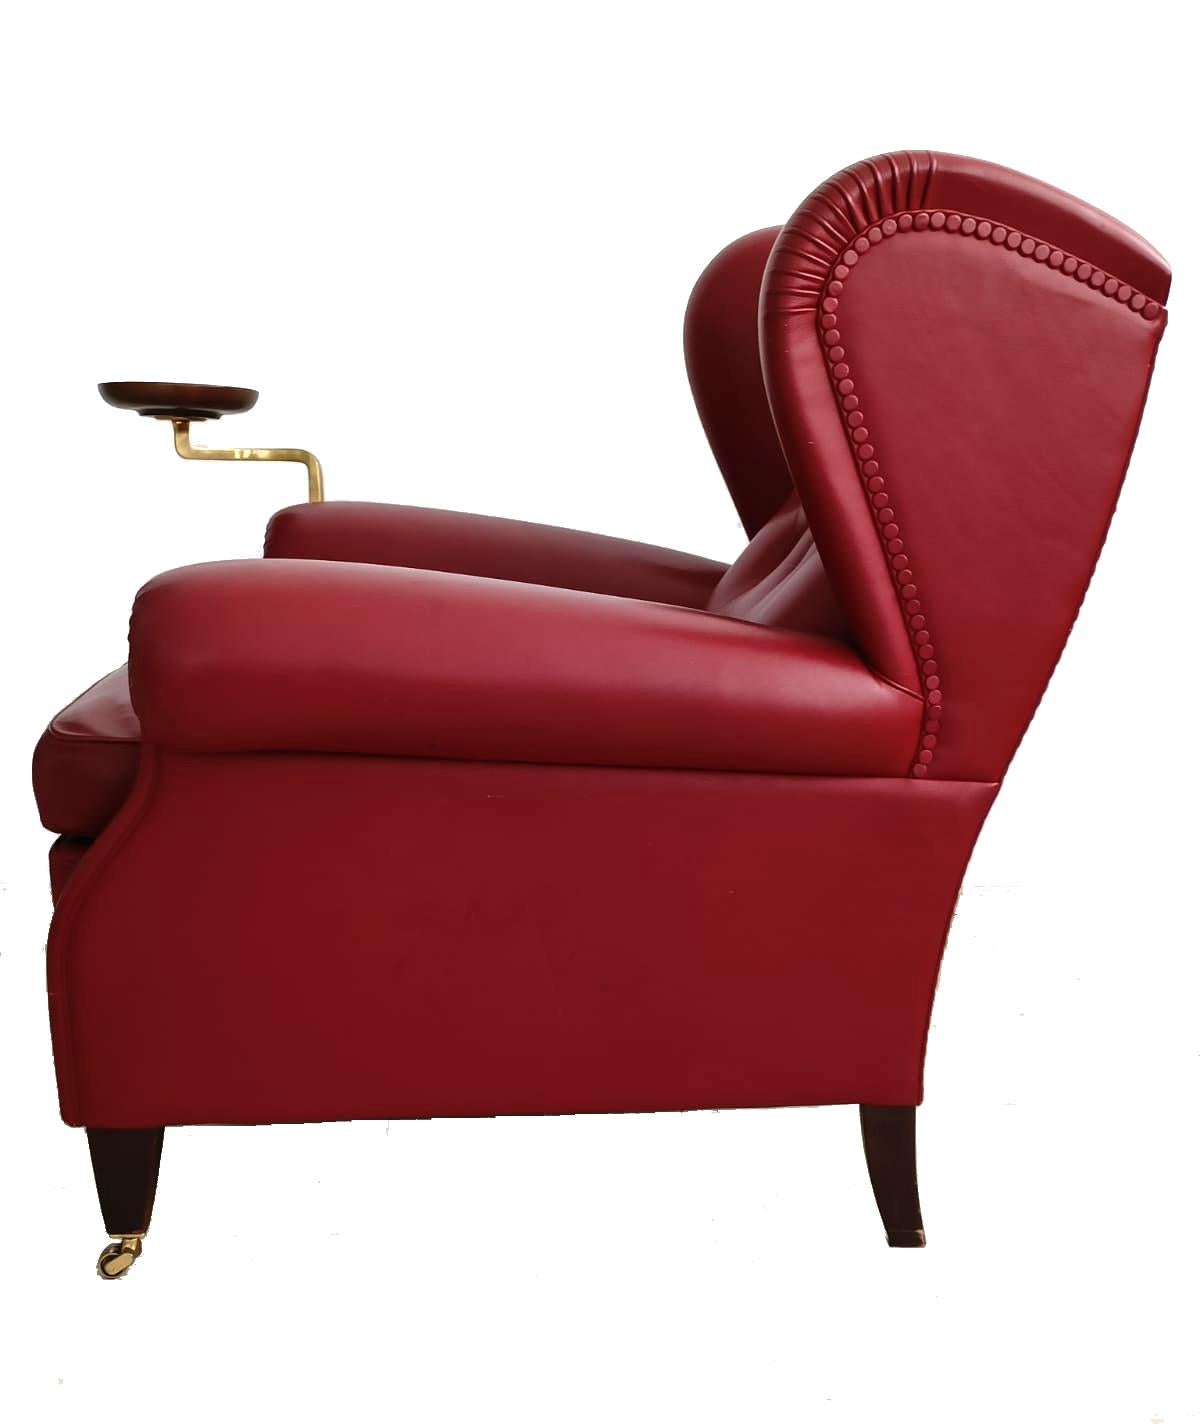 1919 Armchair Bergere Model in Century Leather Red Colour with Ashtray 2